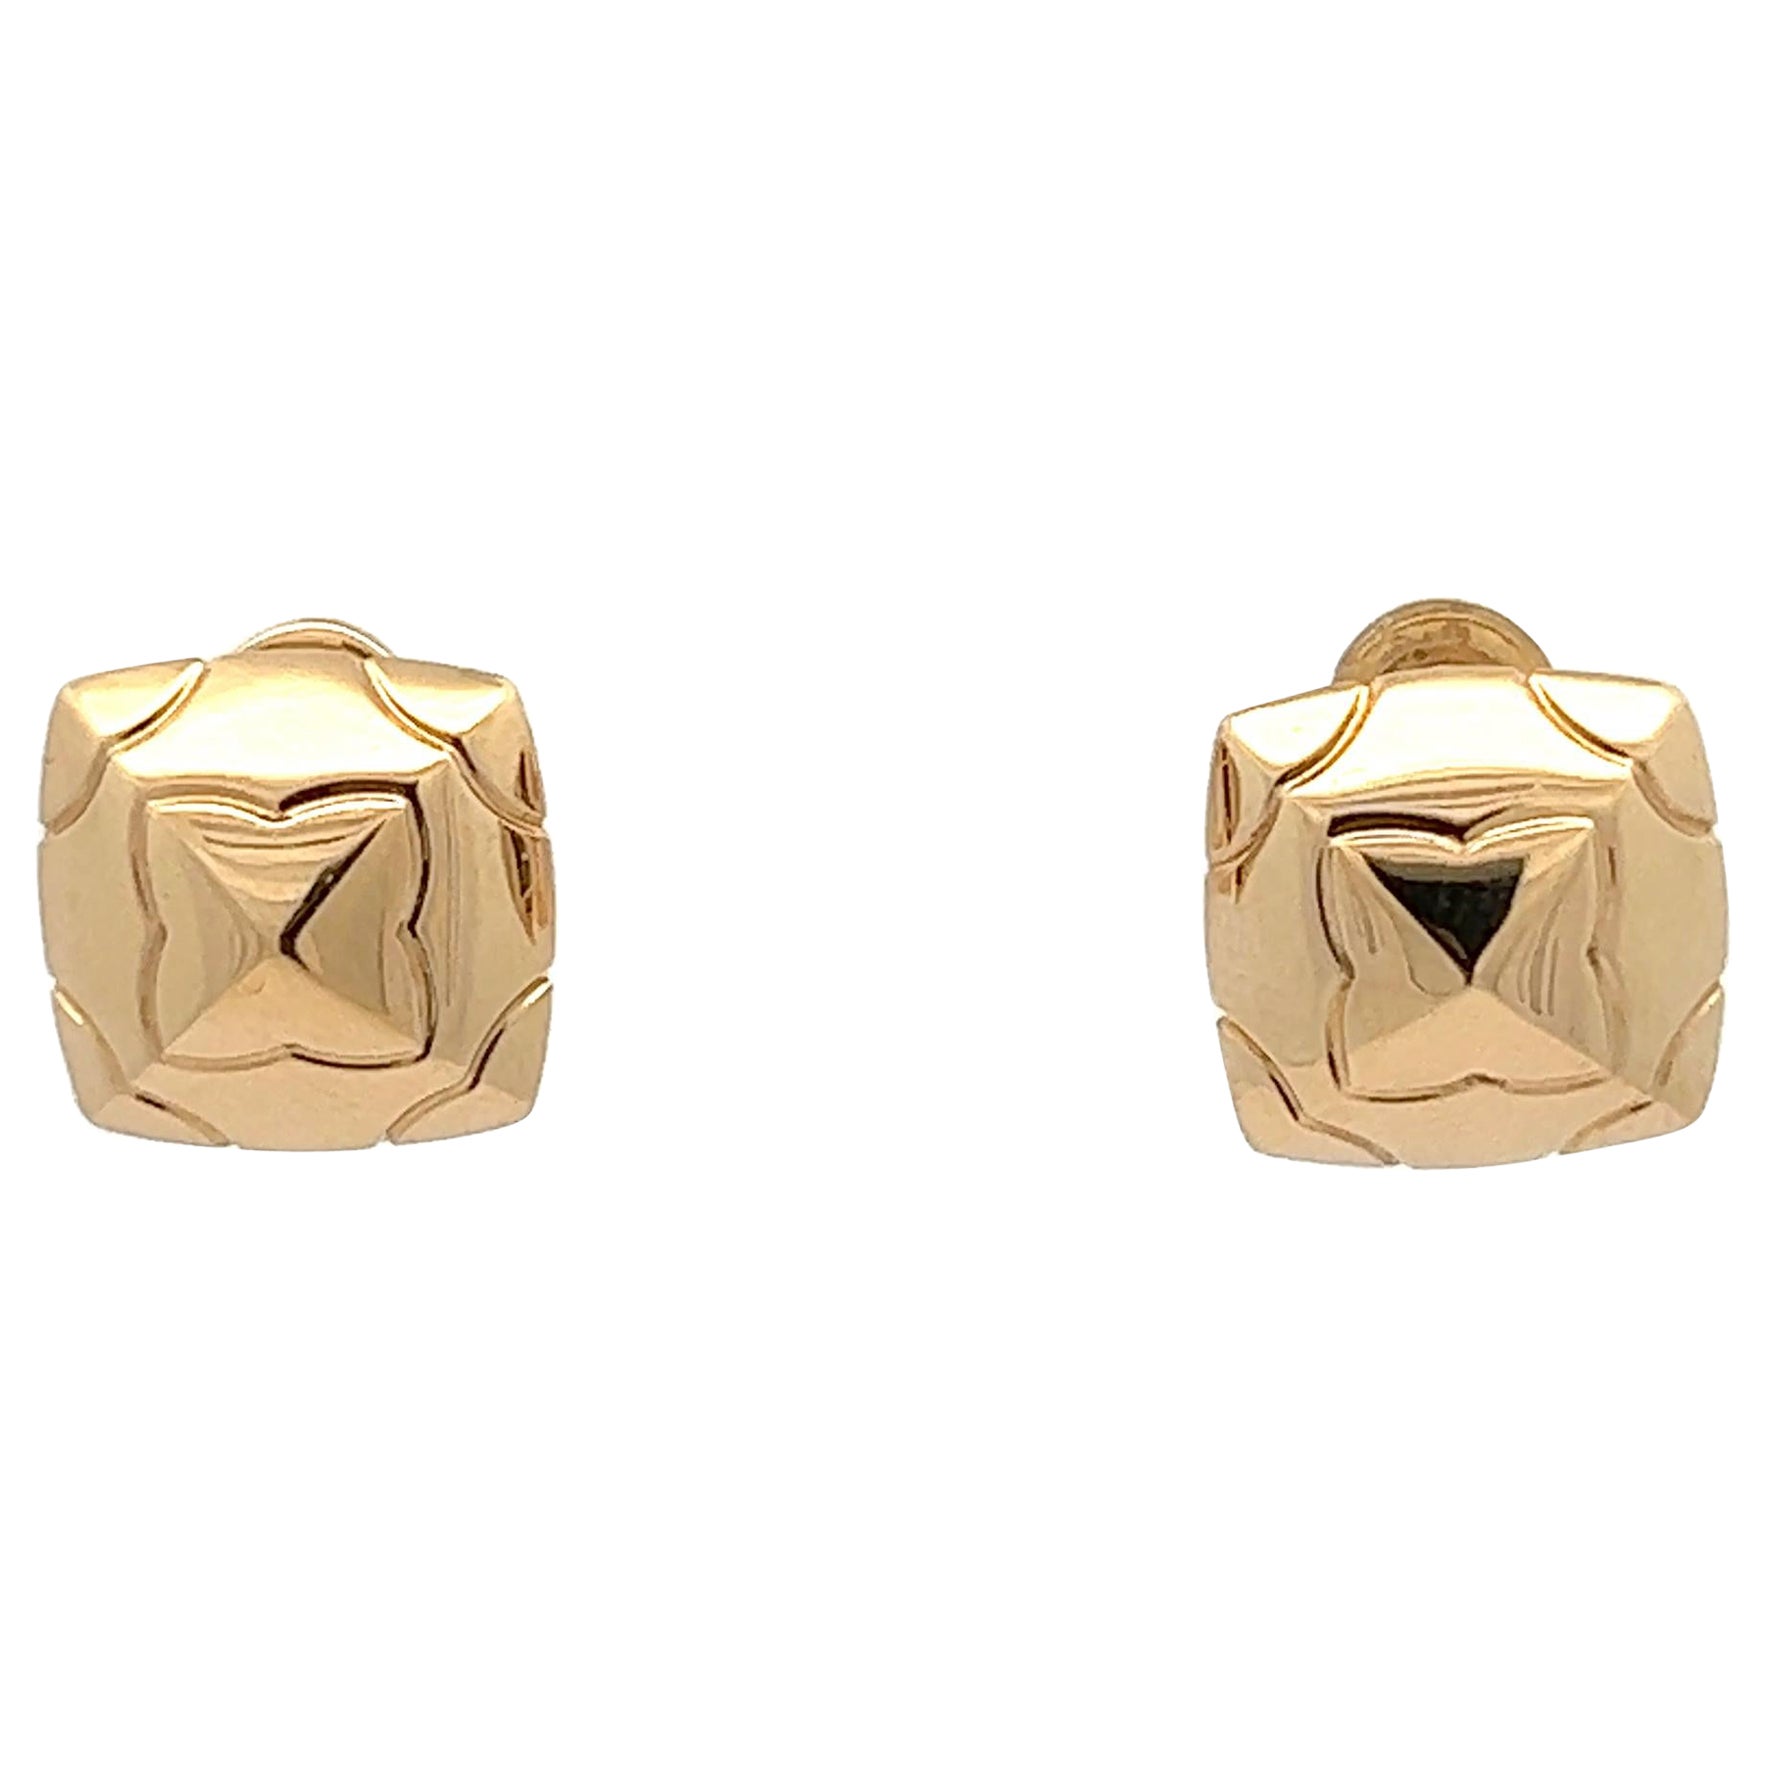 A pair of 18k yellow gold "Pyramid" ear clips by Bulgari. For Sale